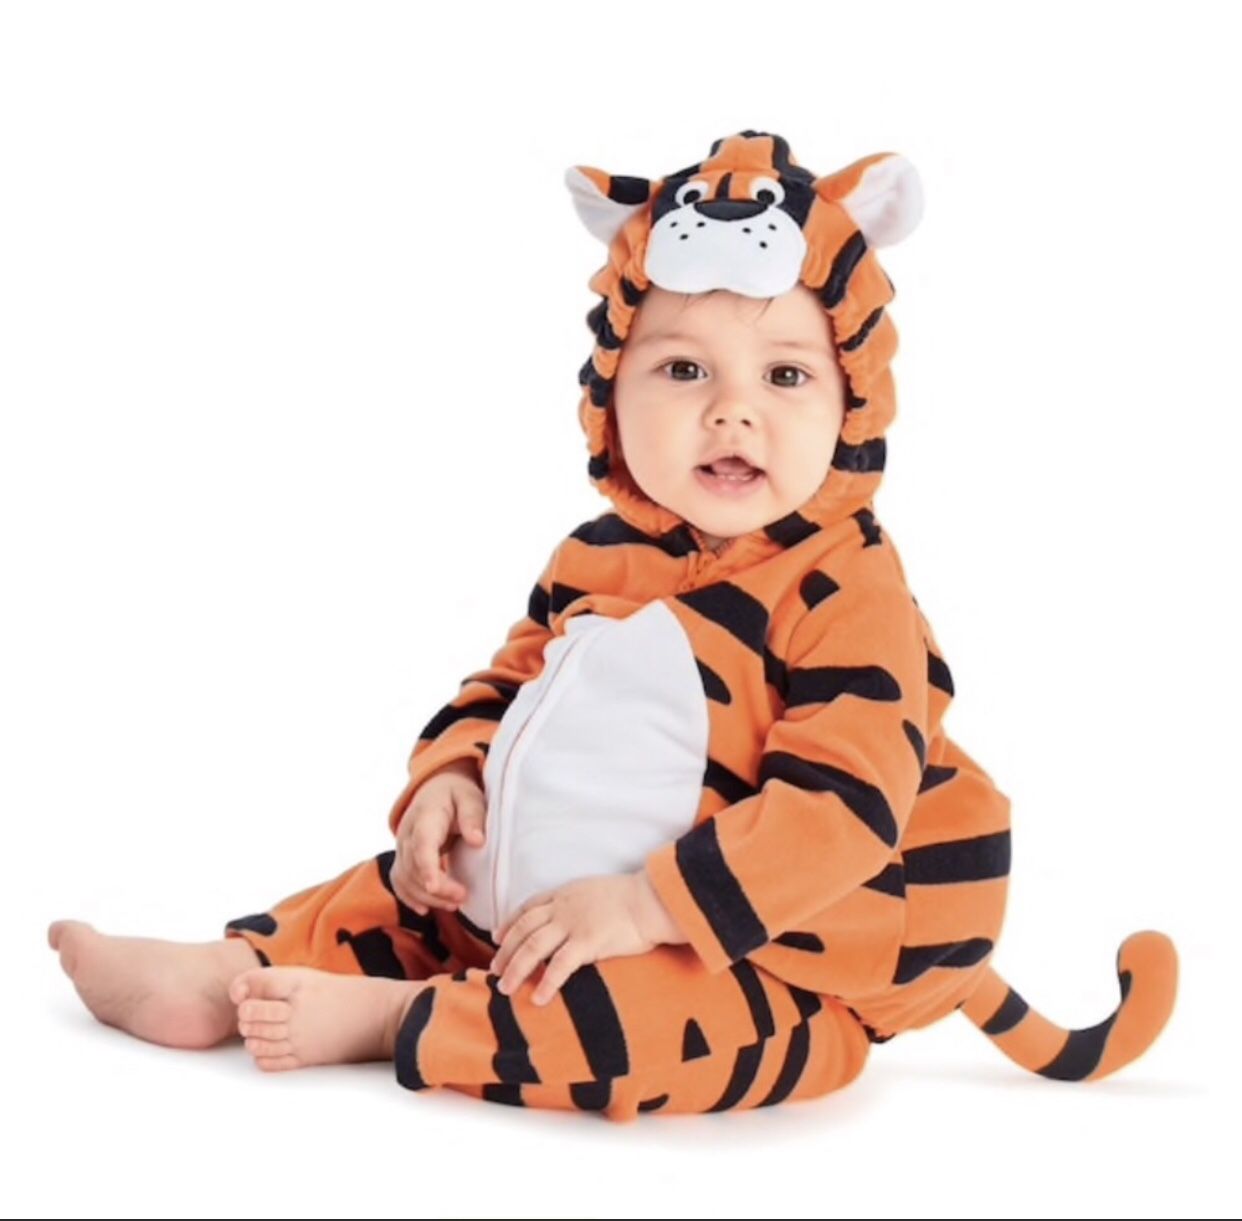 Carter's tiger costume 2 piece One size.